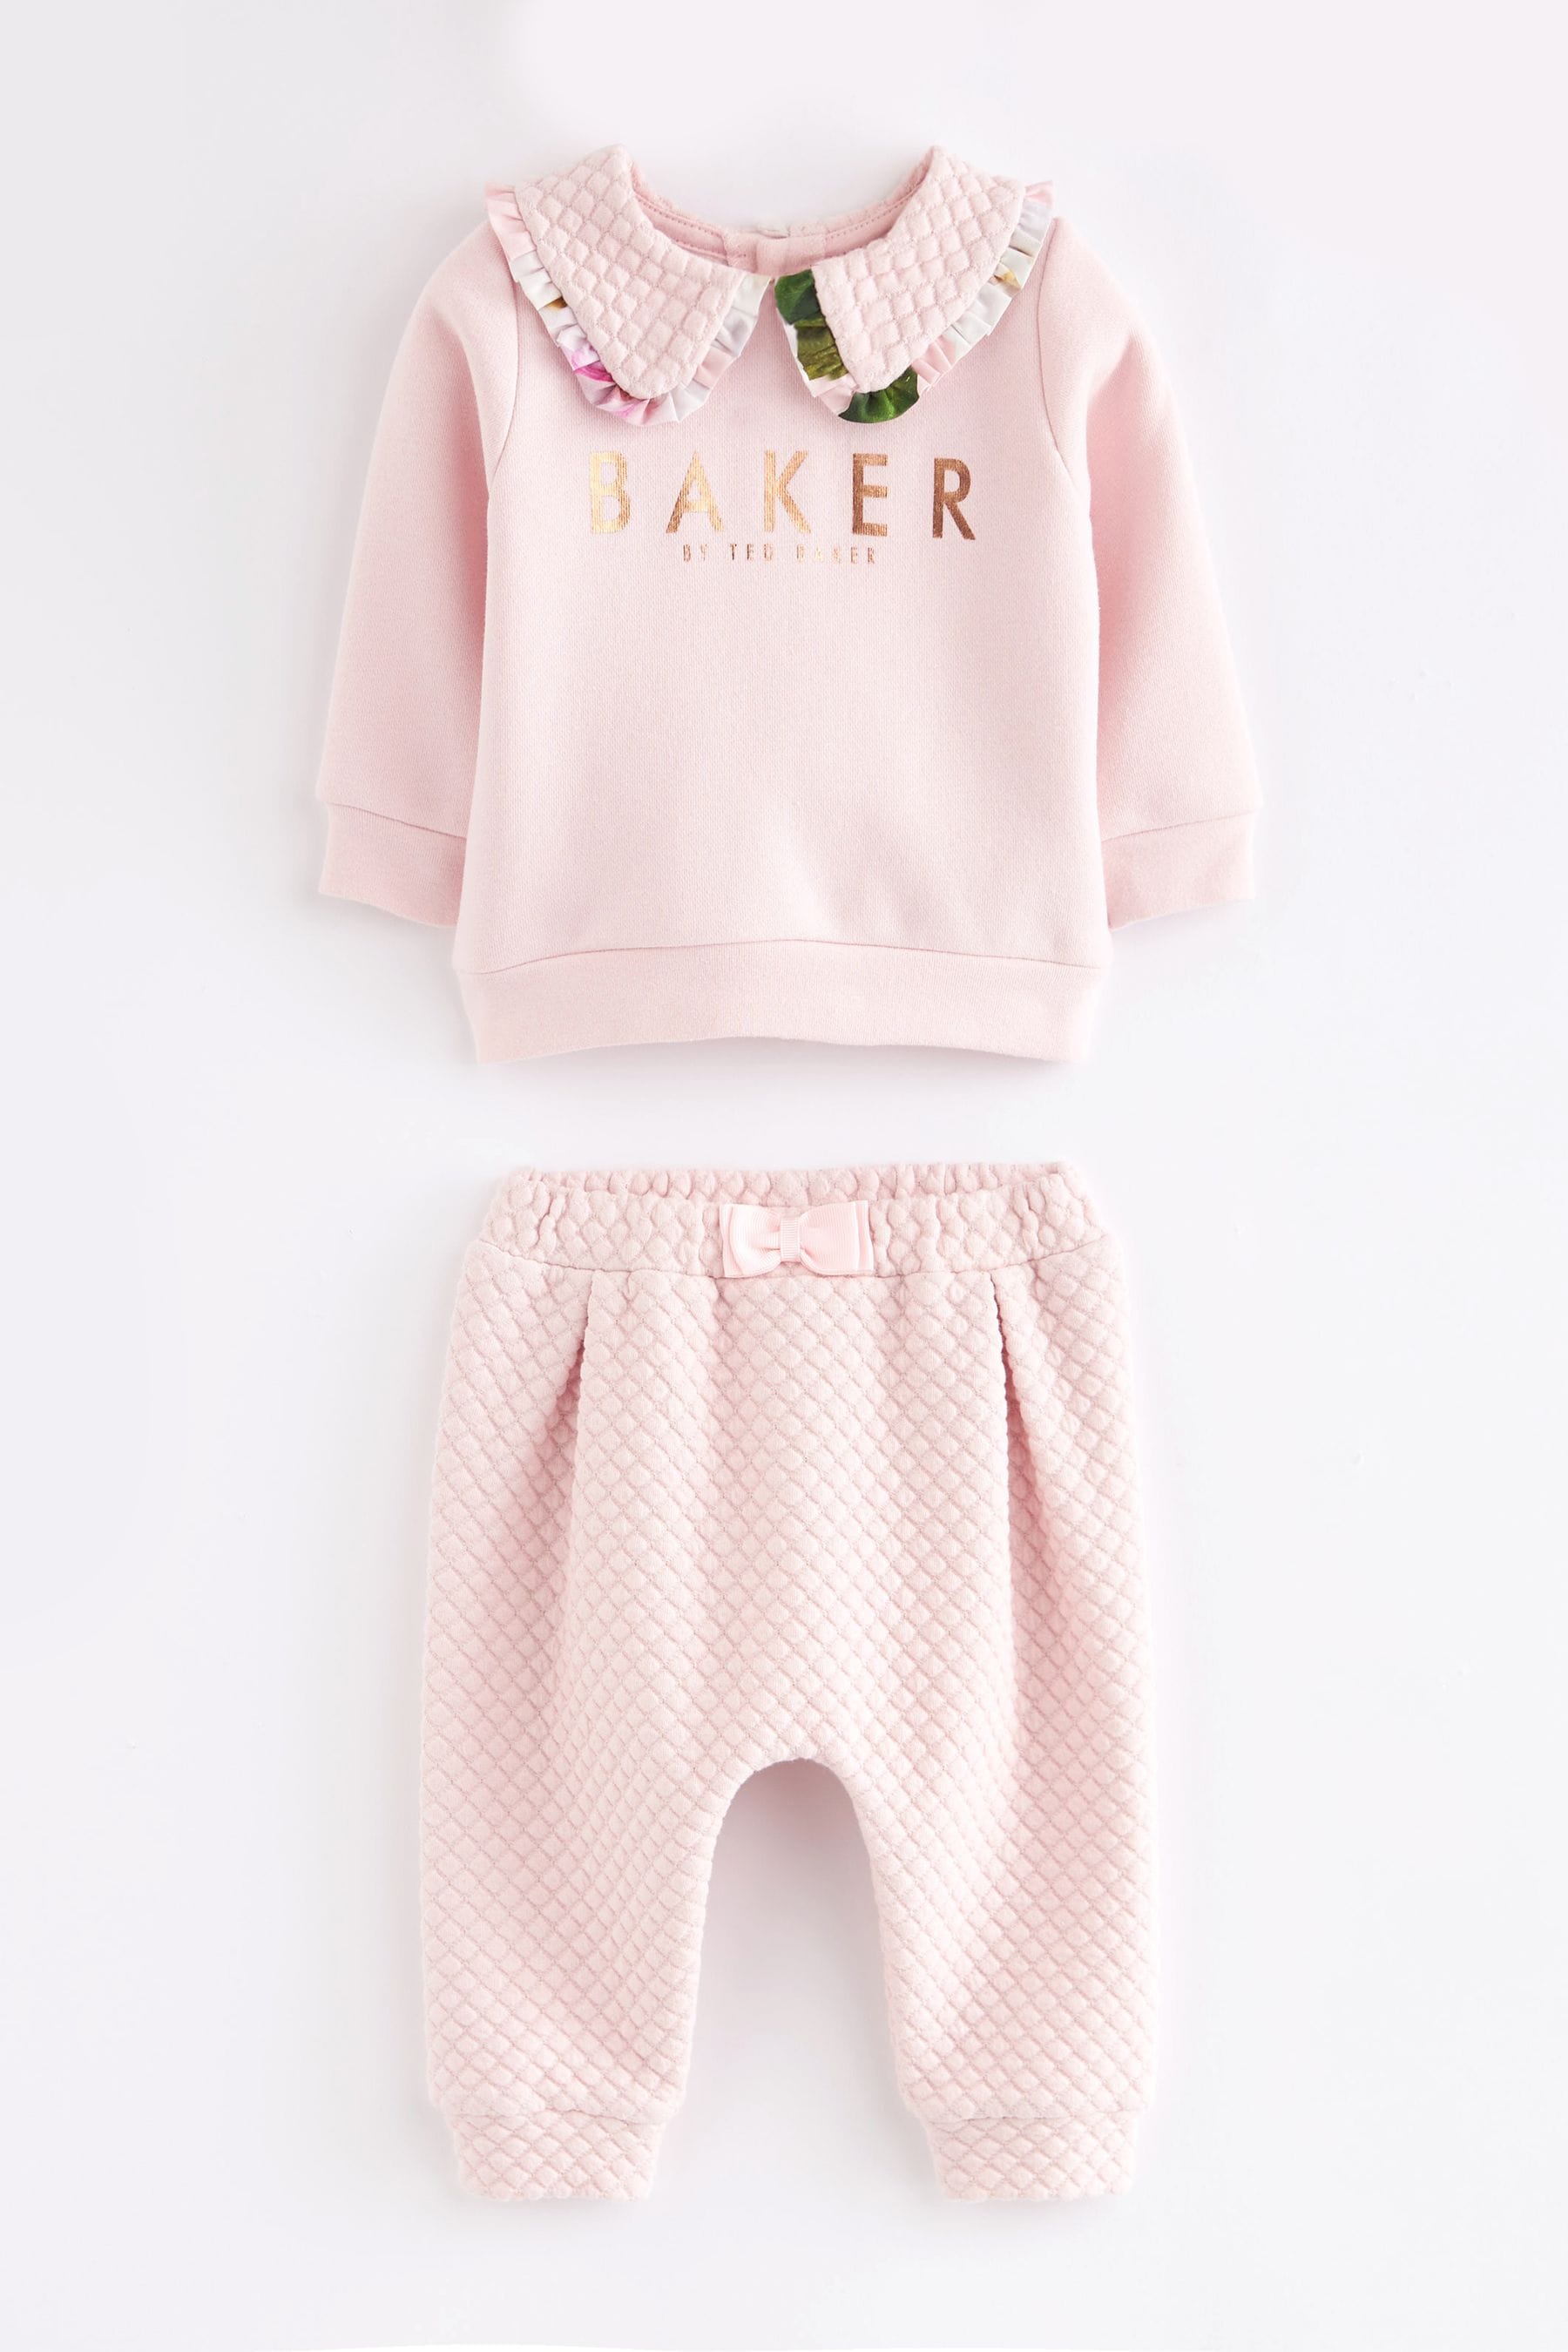 Buy Baker by Ted Baker Pink Quilted Sweater and Joggers Set from the ...